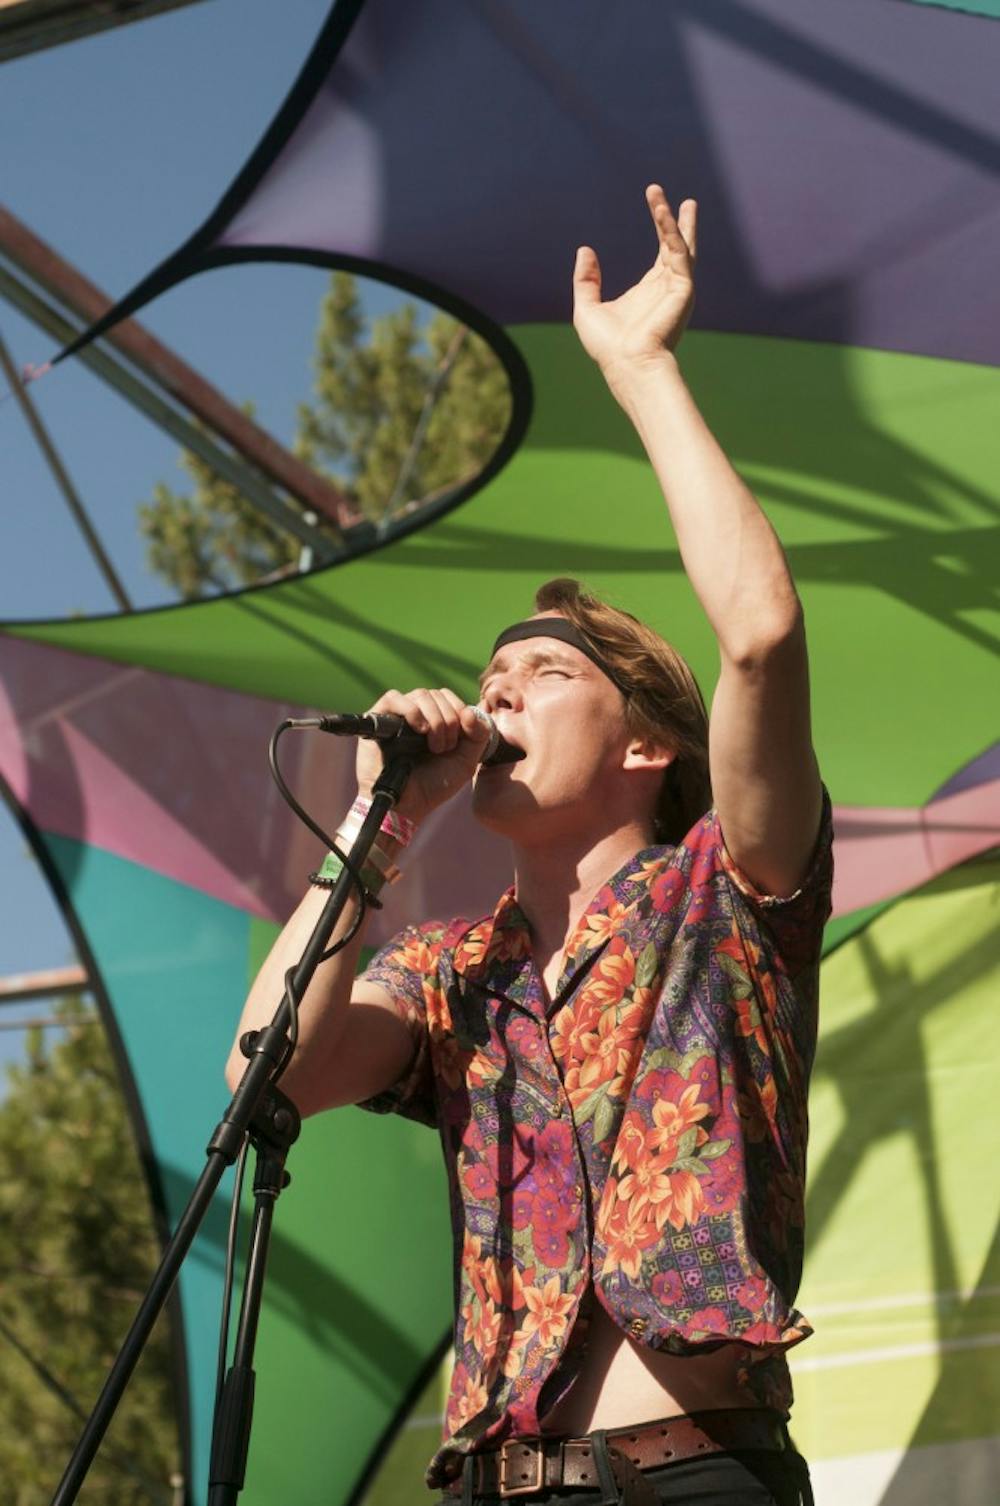 Harry Hayes, lead Singer for the band Irontom on July 5, 2016 at Common Ground. Irontom was preforming on the Sparrow Stage.